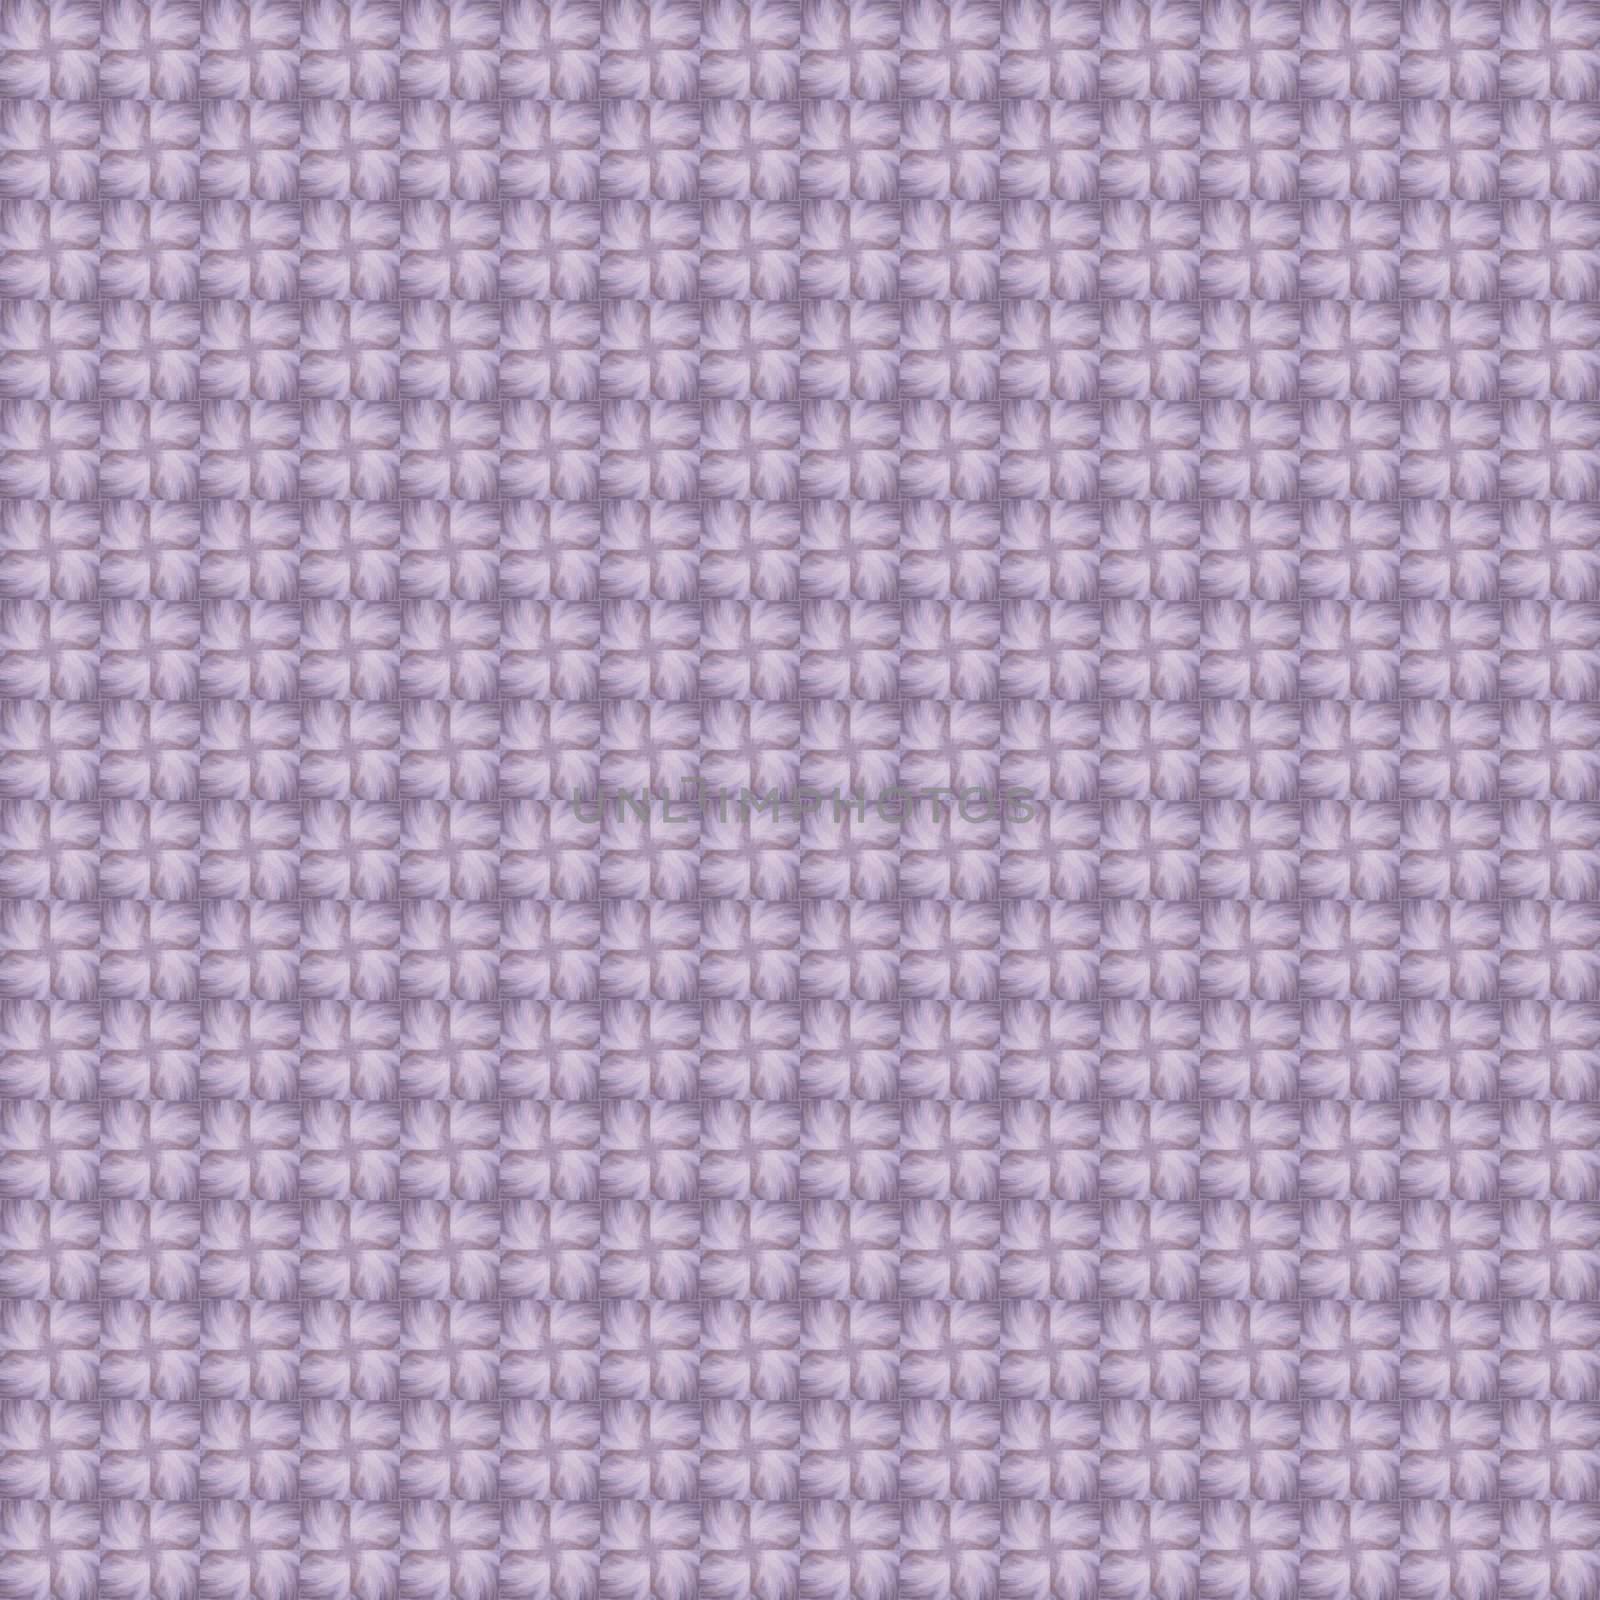 Seamless tileable background. Small lilac fur flowers retro texture with an old-fashioned twist